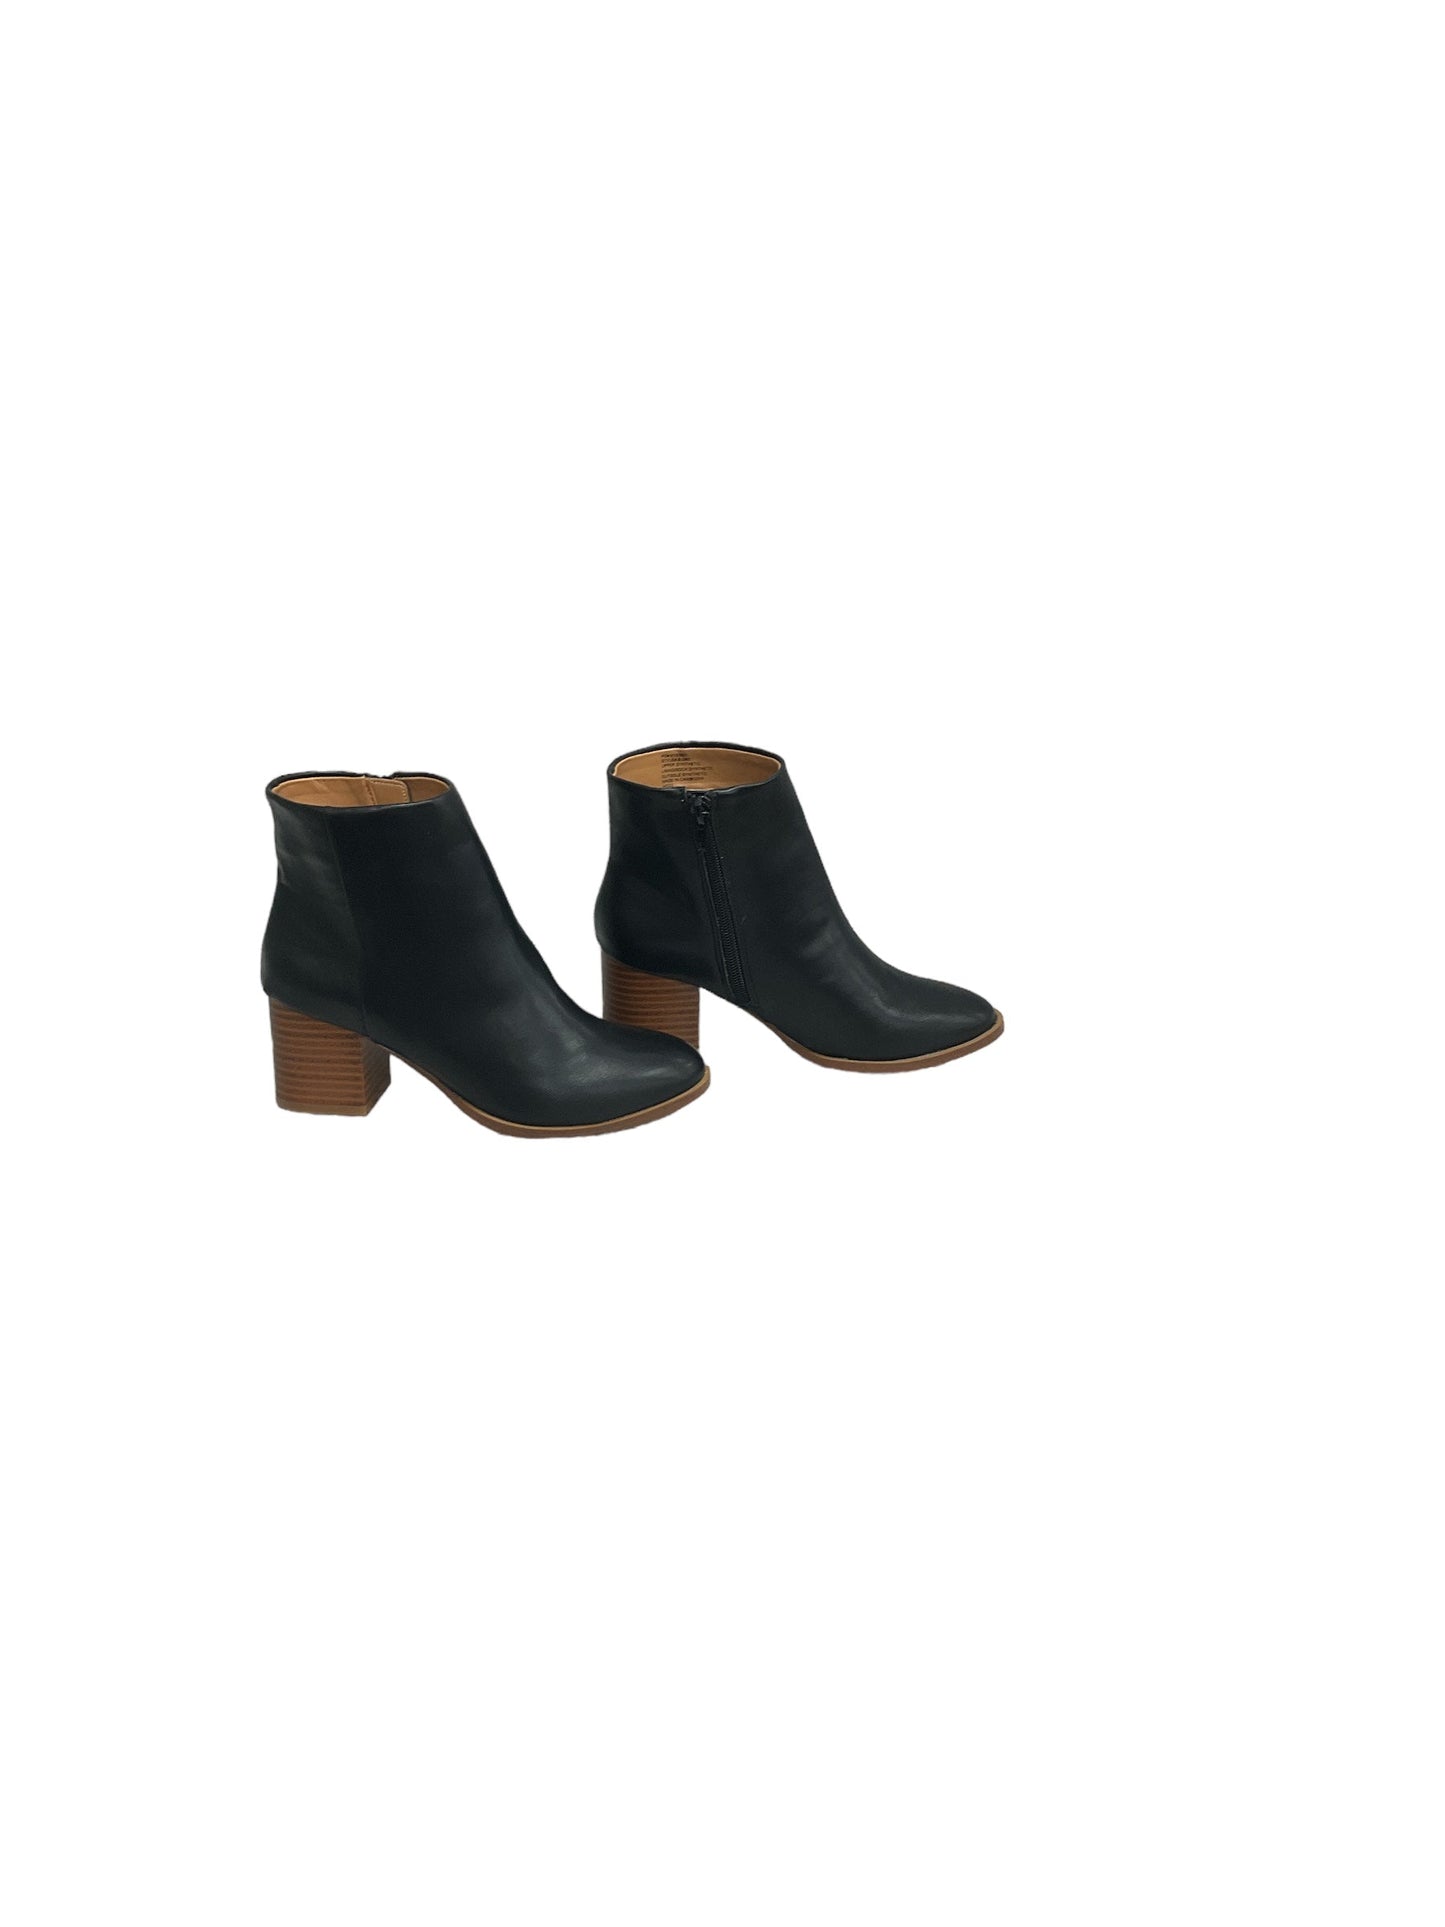 Boots Ankle Heels By J Crew  Size: 5.5